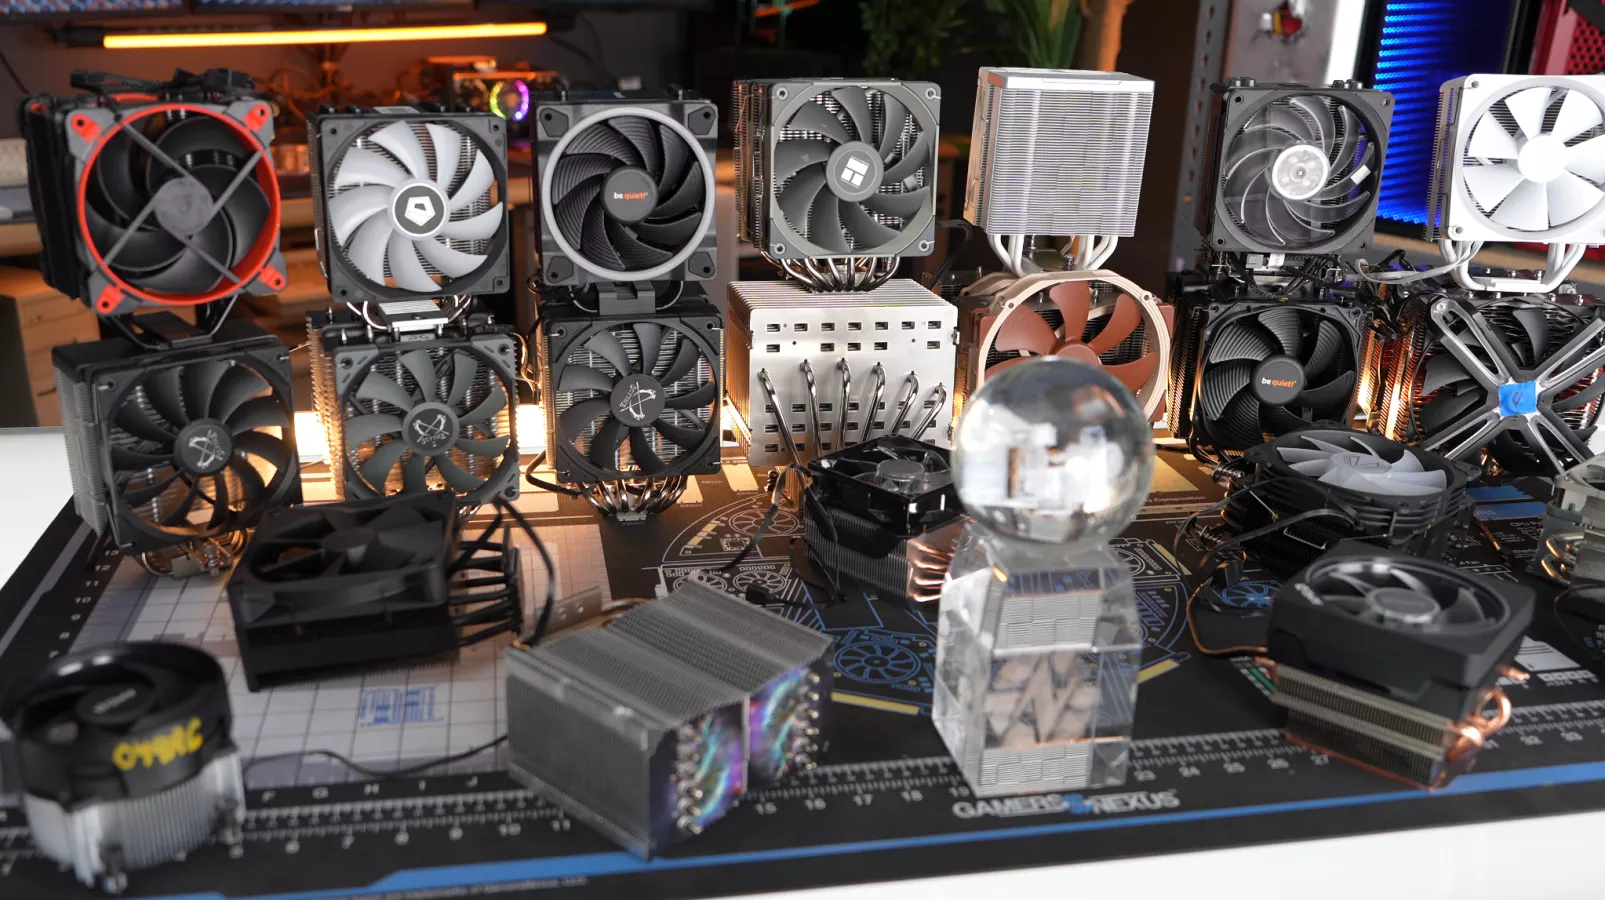 A brief explanation on CPU coolers